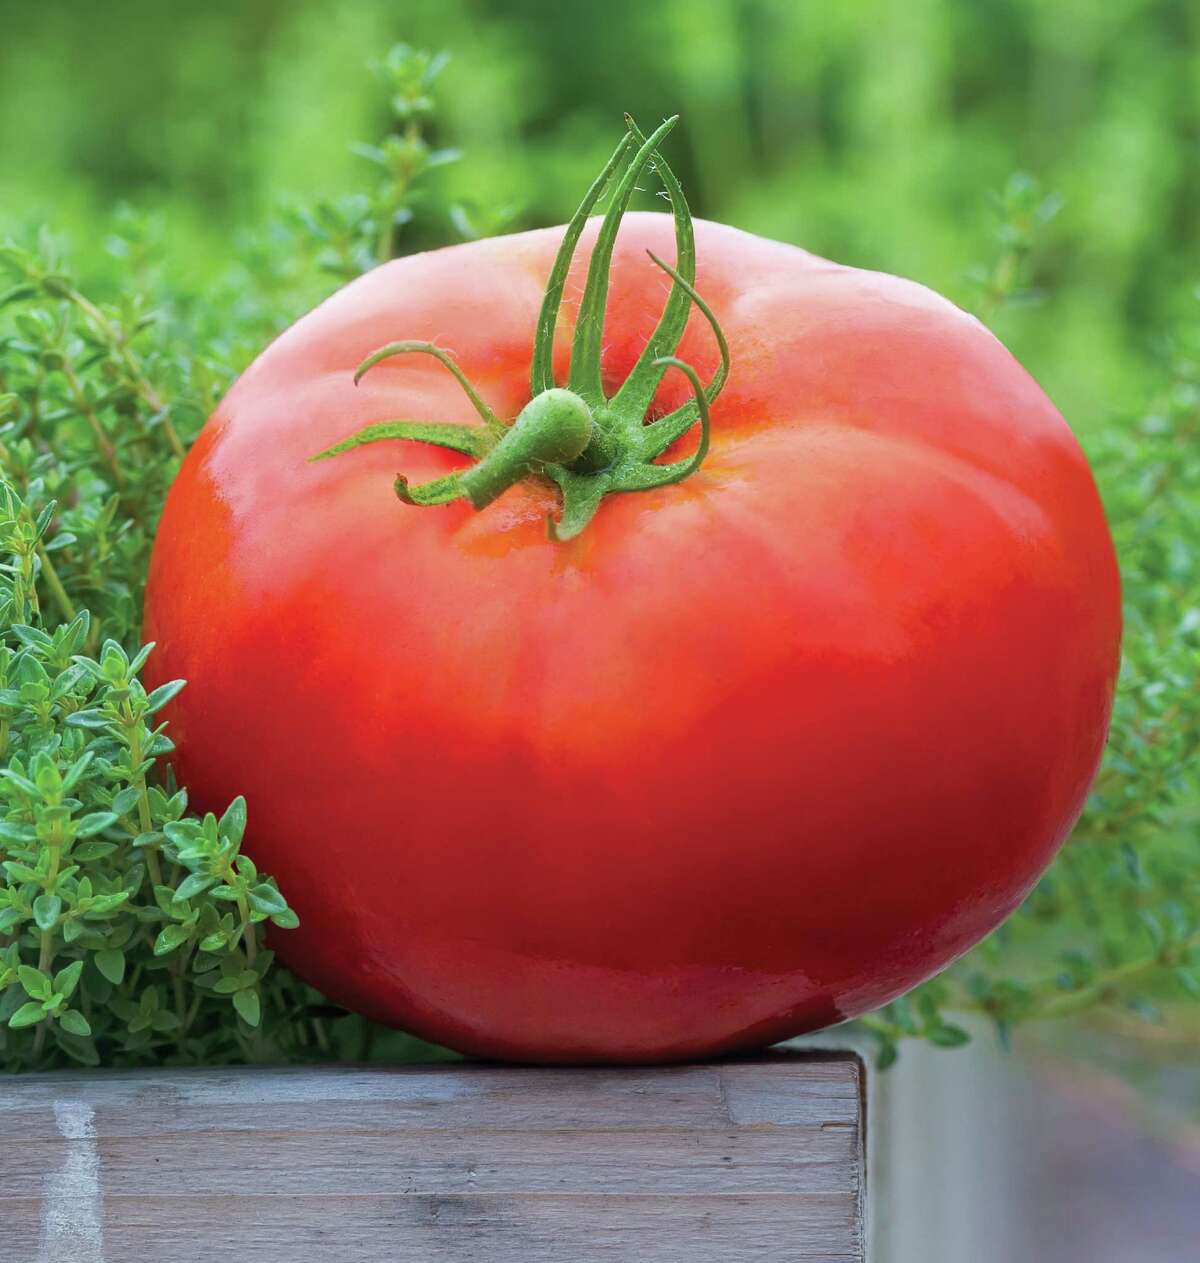 Tomatoes have nearly 32,000 genes, or 7,000 more than a human.